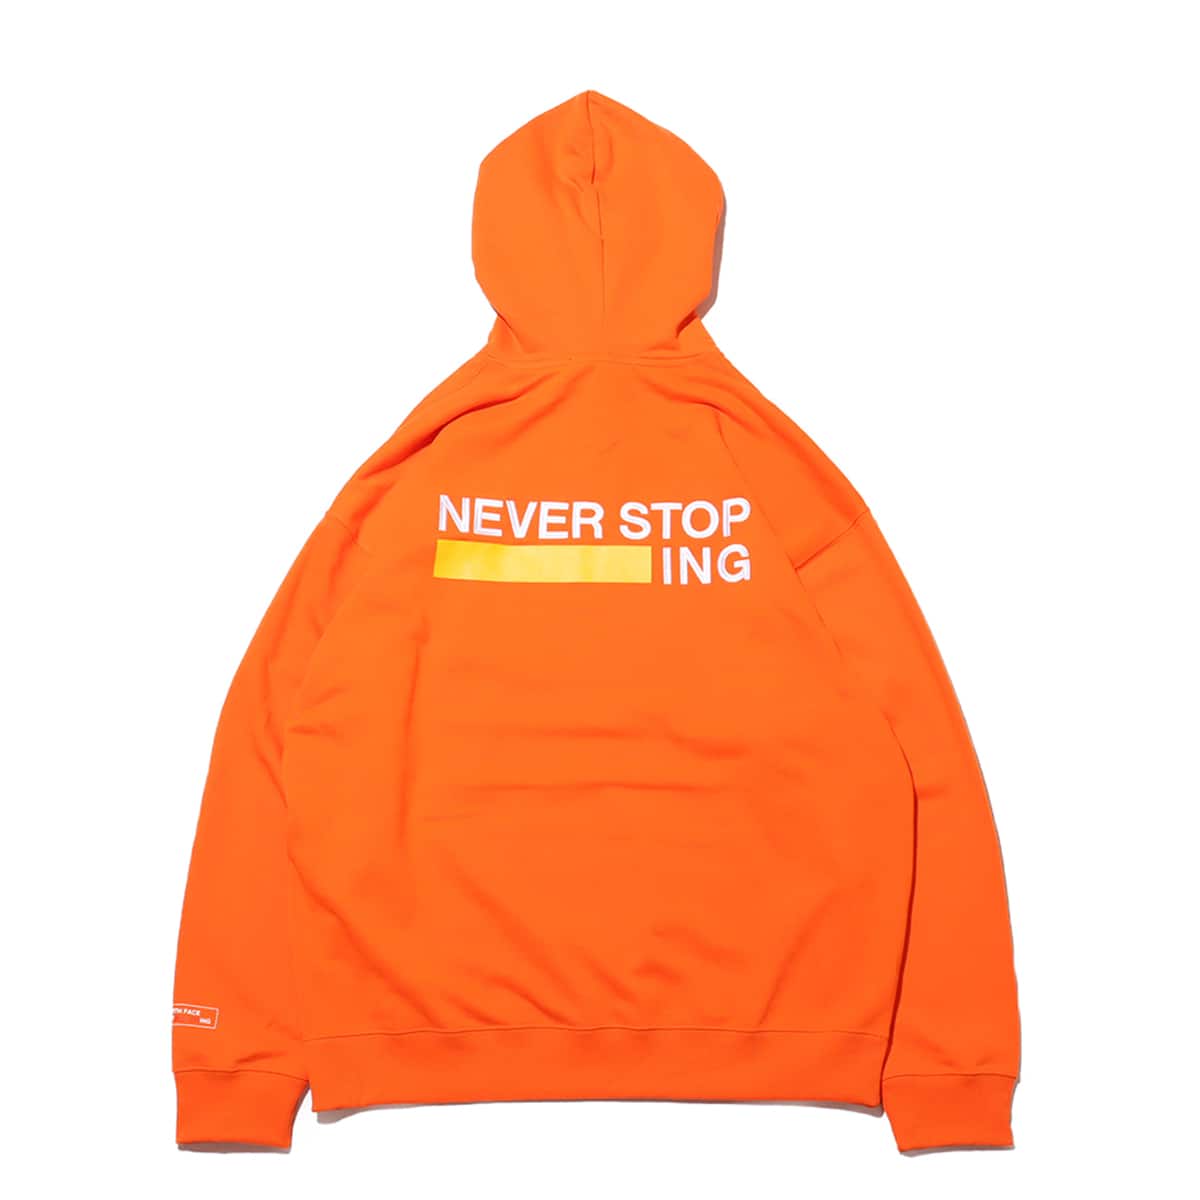 "THE NORTH FACE NEVER STOP ING Hoodie"